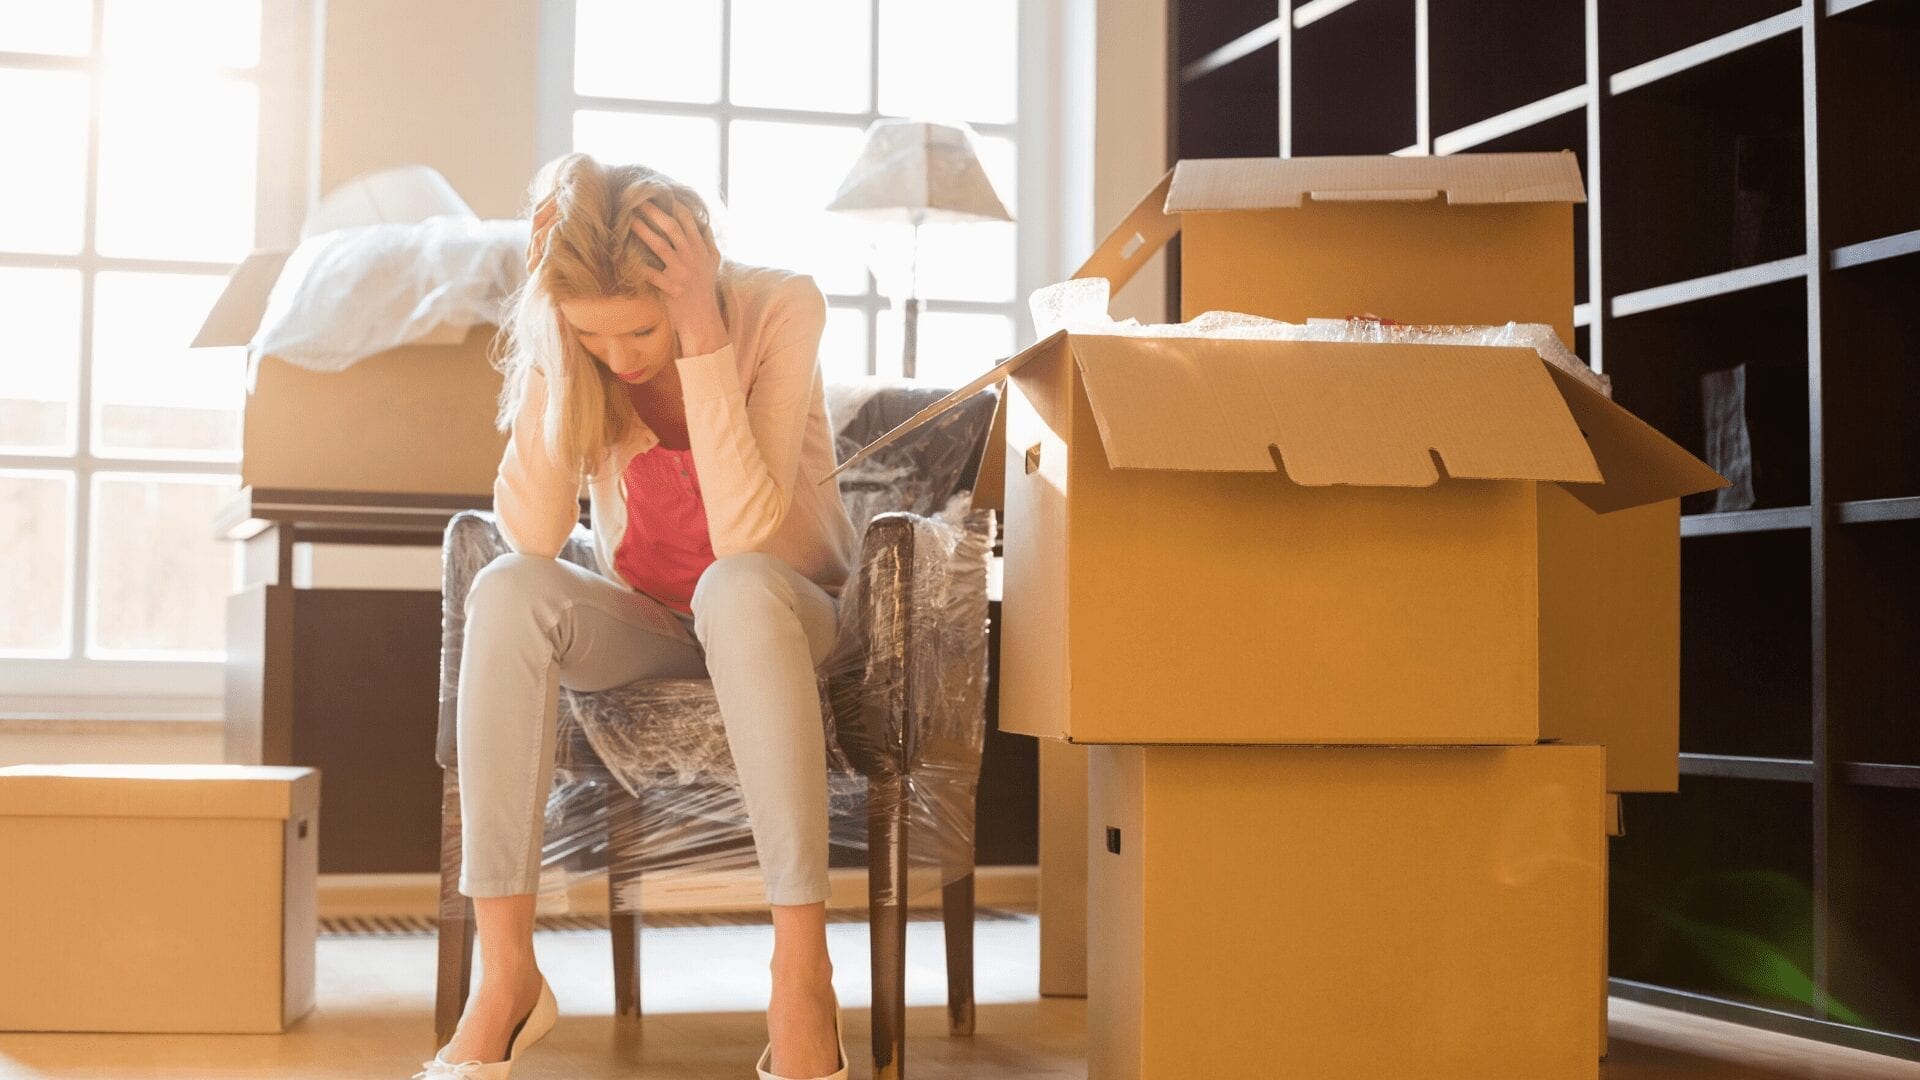 women stressed of move and in need of professional organizer